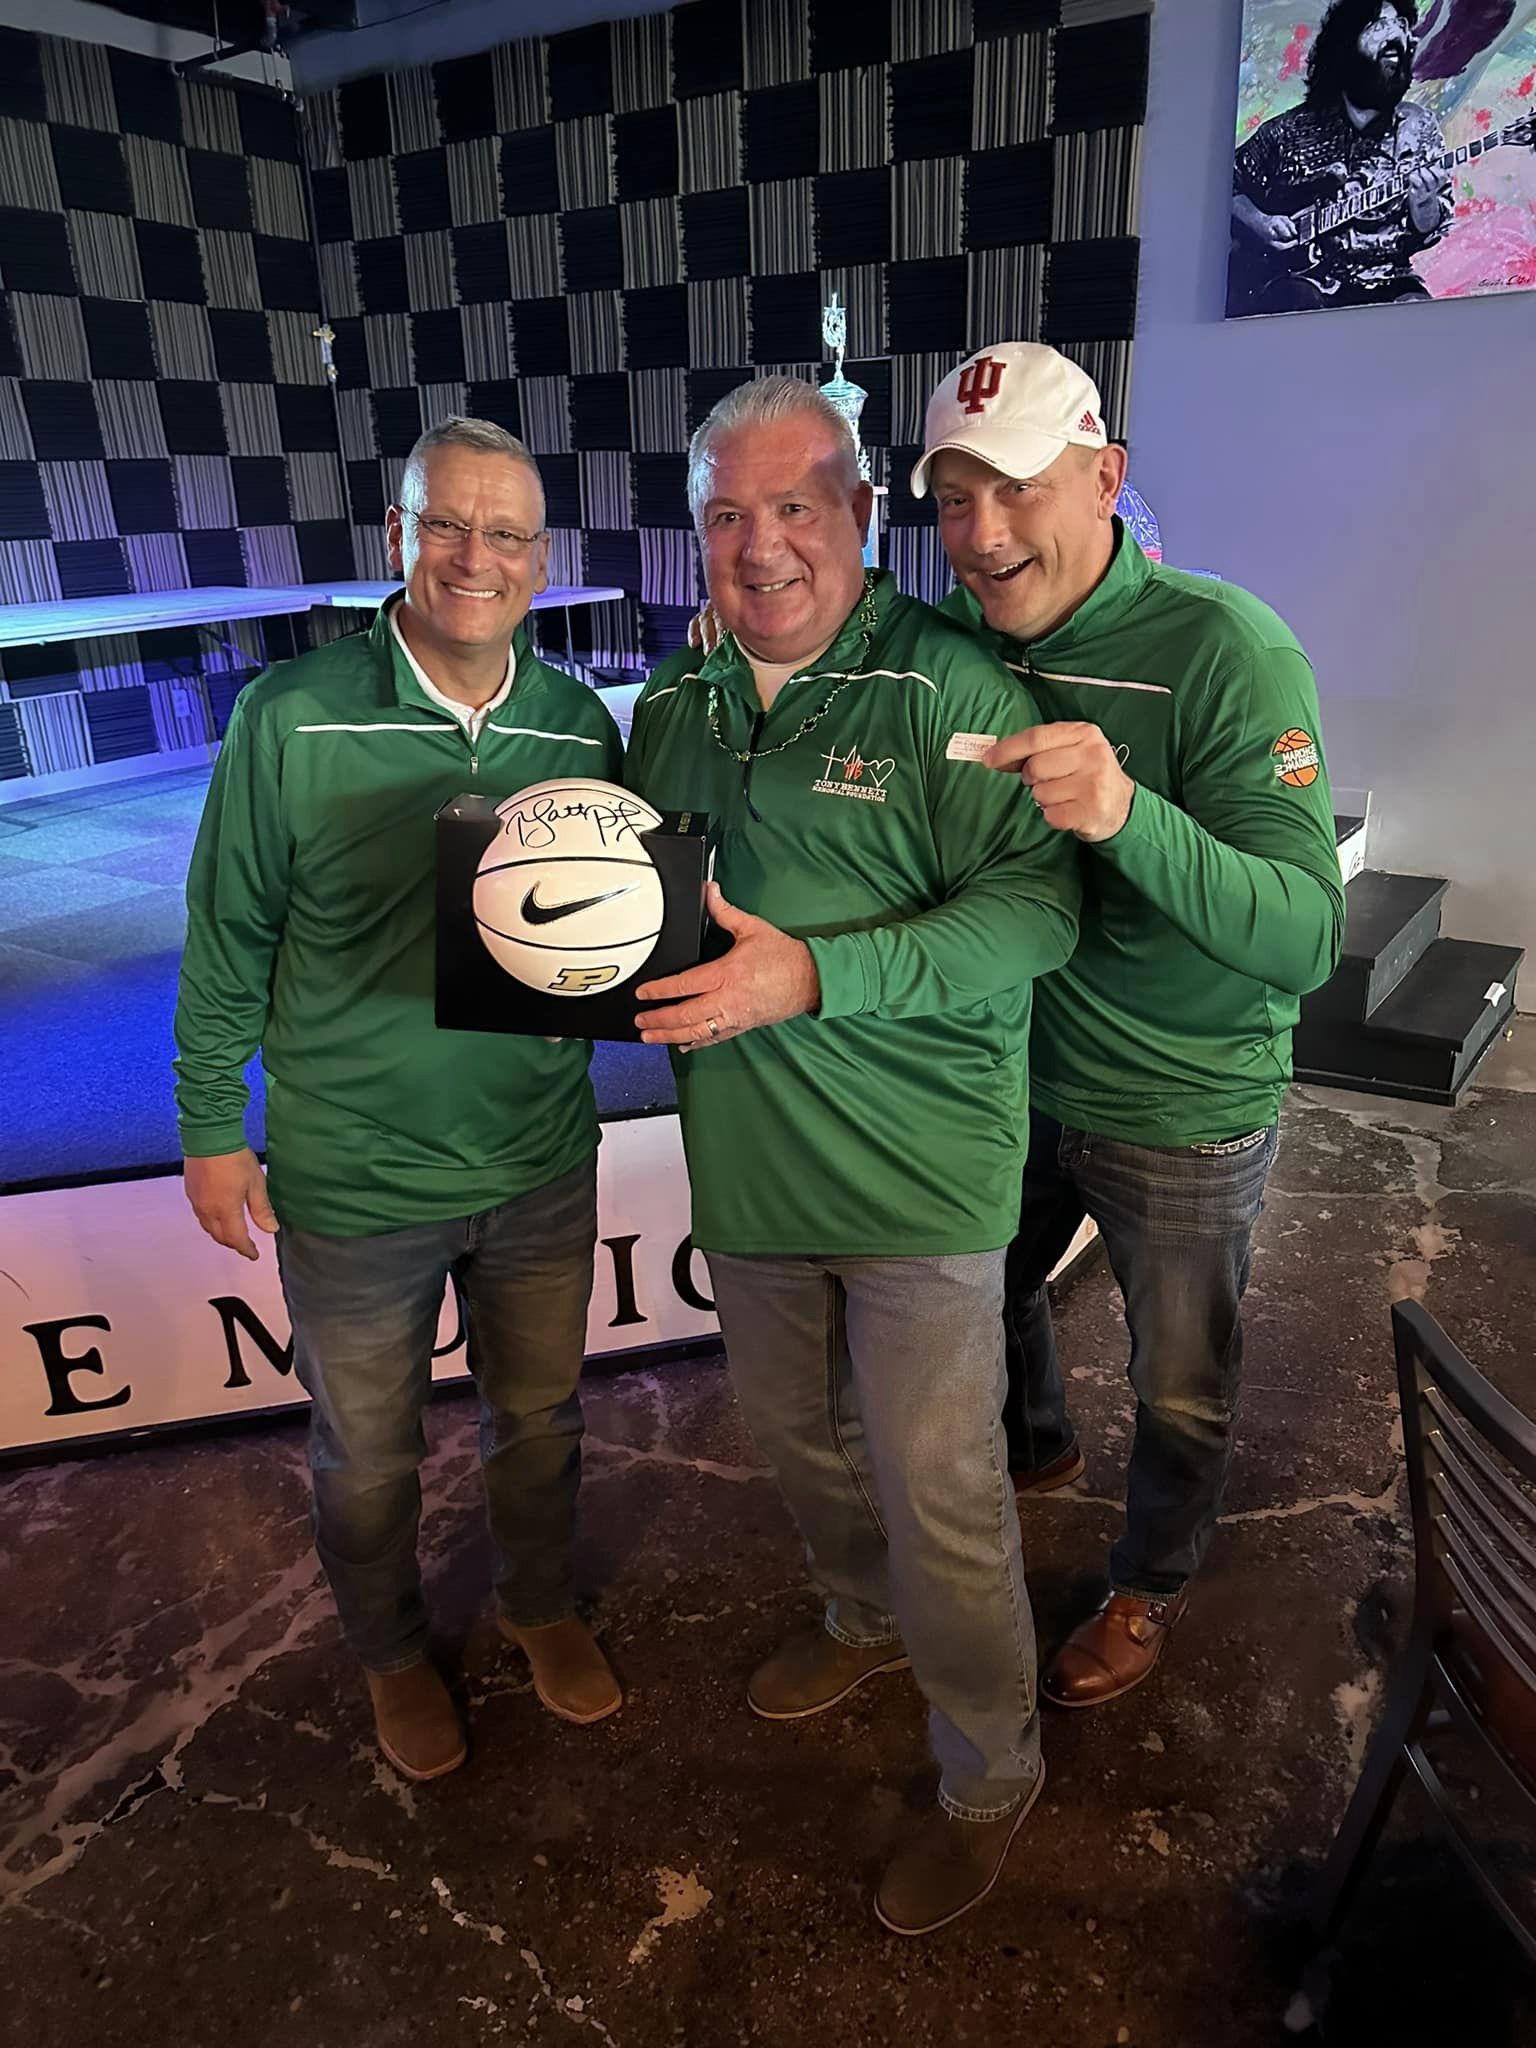 Three men posing with a basketball that was given away as a prize